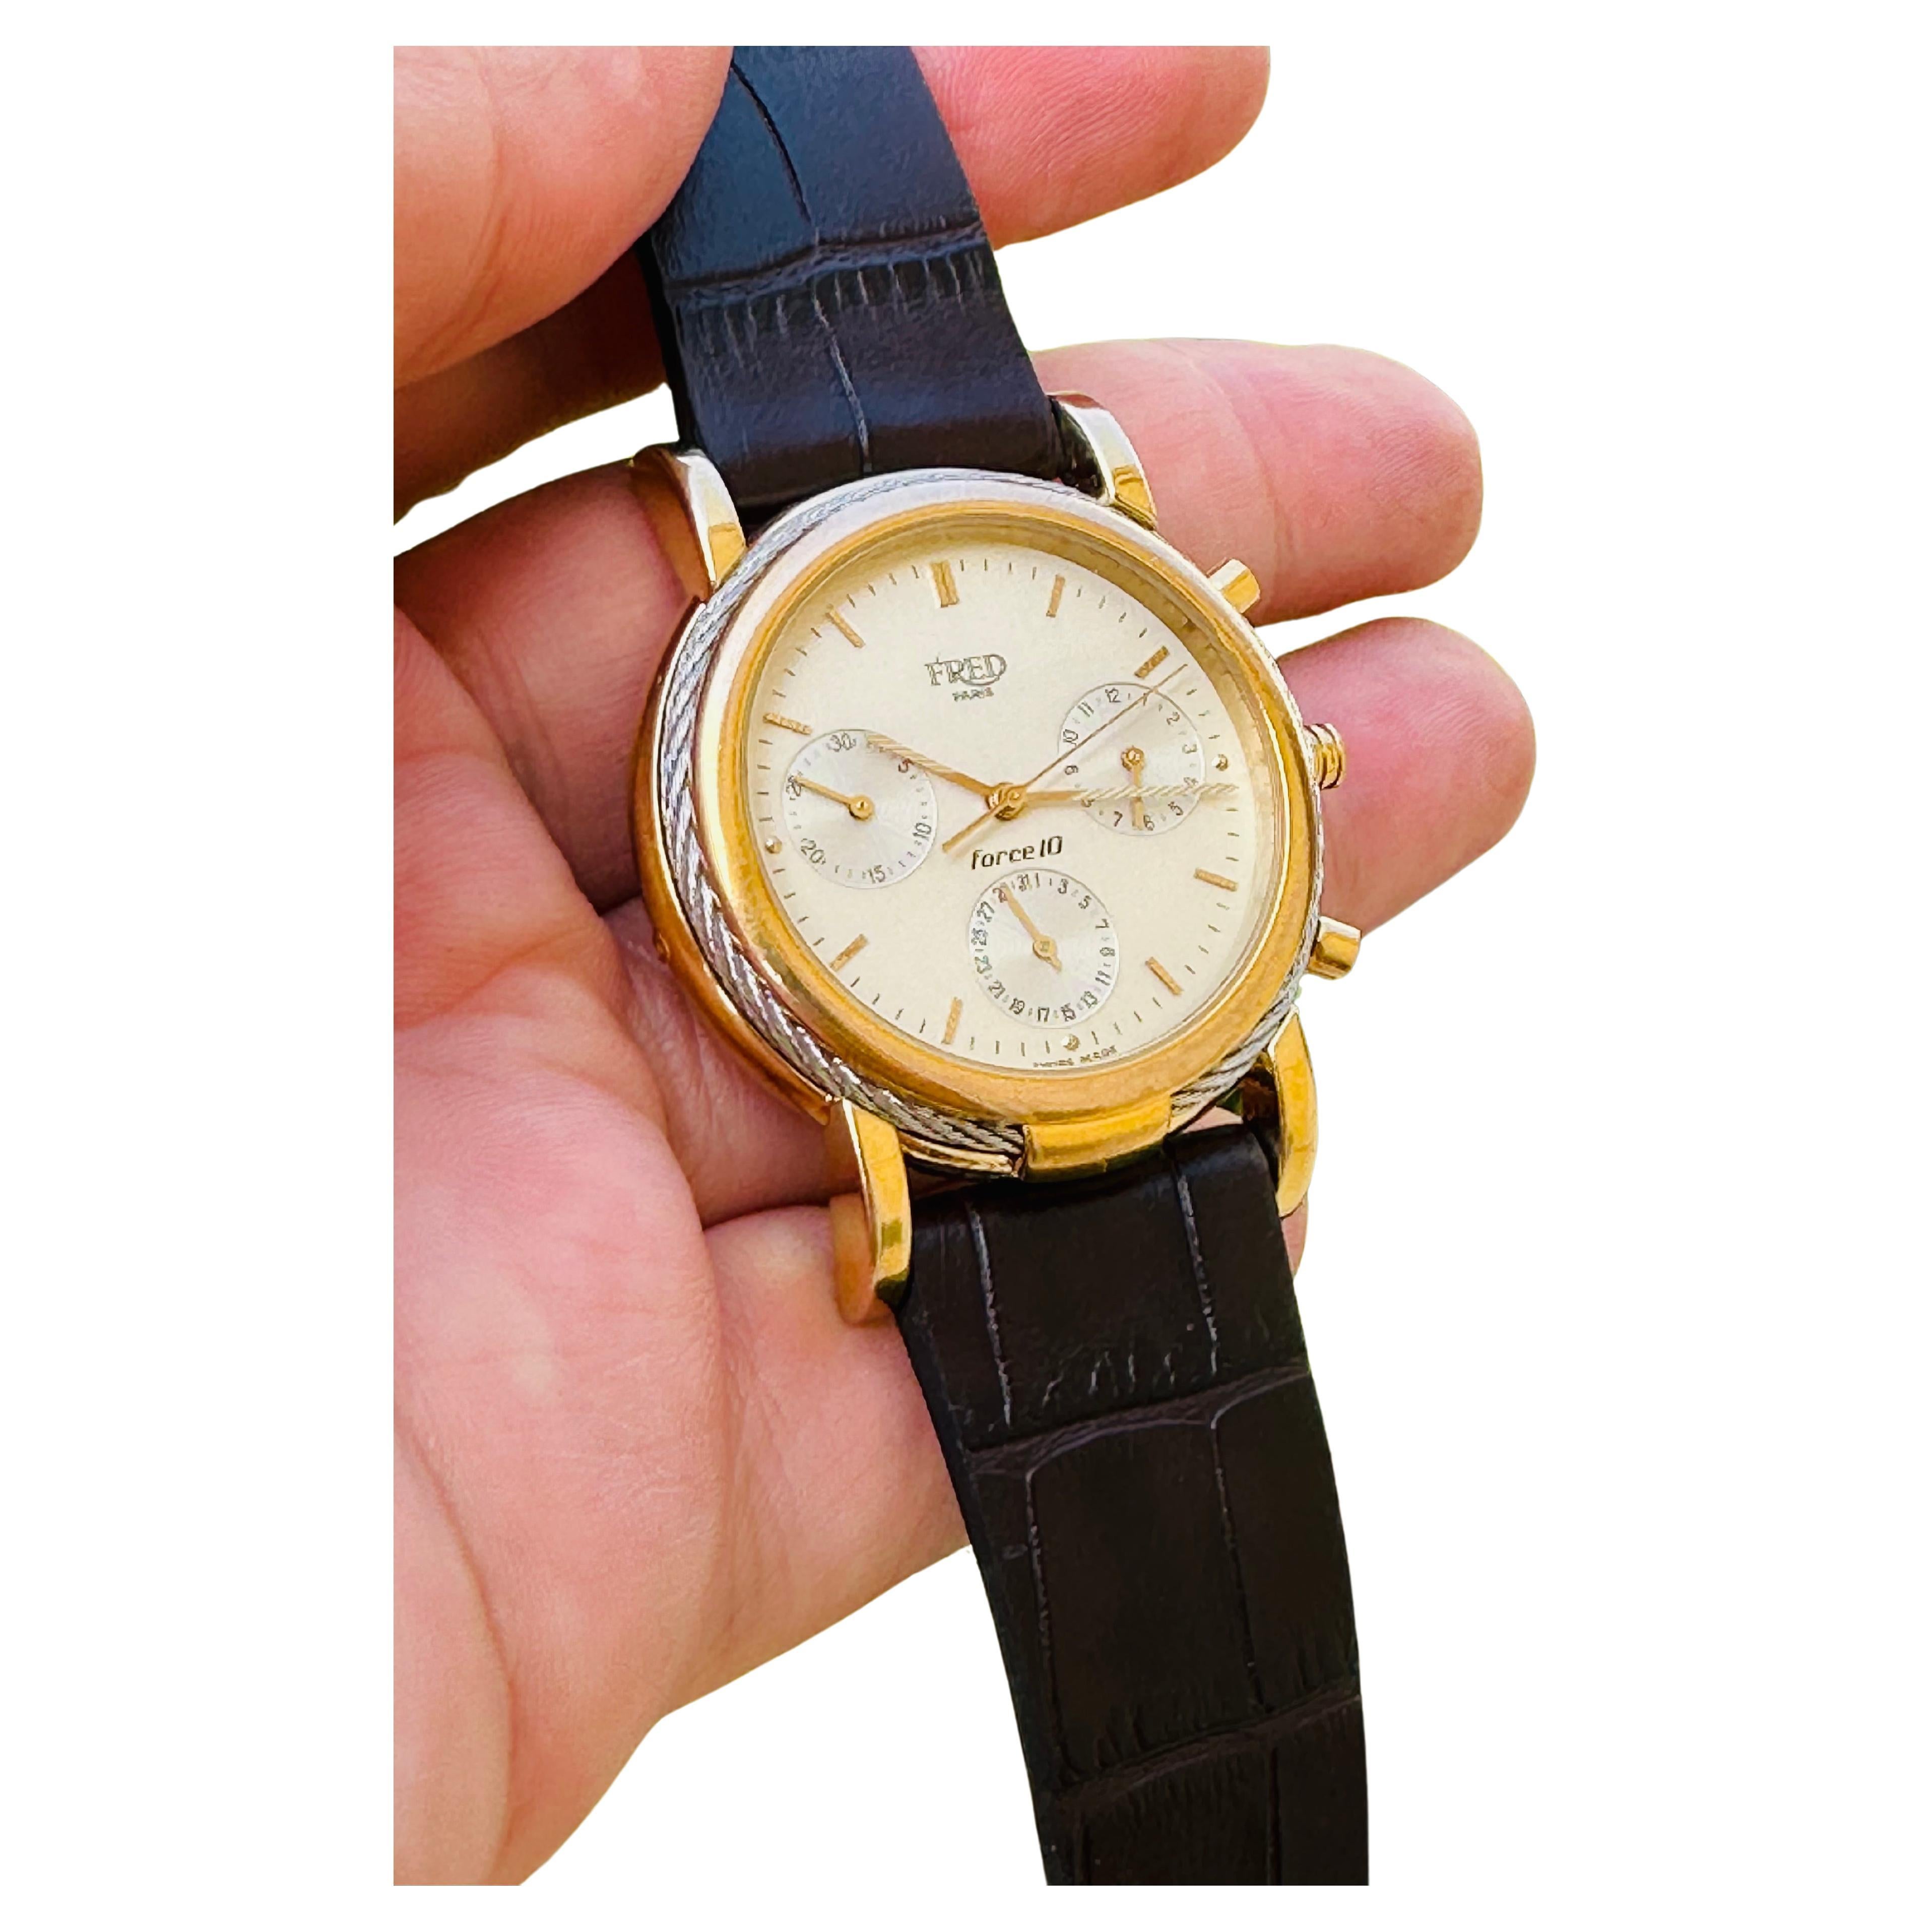 Brand: FRED

Model: Force 10

Reference Number: F10 16846

Country Of Manufacture: Switzerland

Movement: Quartz

Case Material: Gold Plated Stainless steel & Platinum

Measurements : Case width: 37 mm. (without crown)

Band Type : Original Buckle